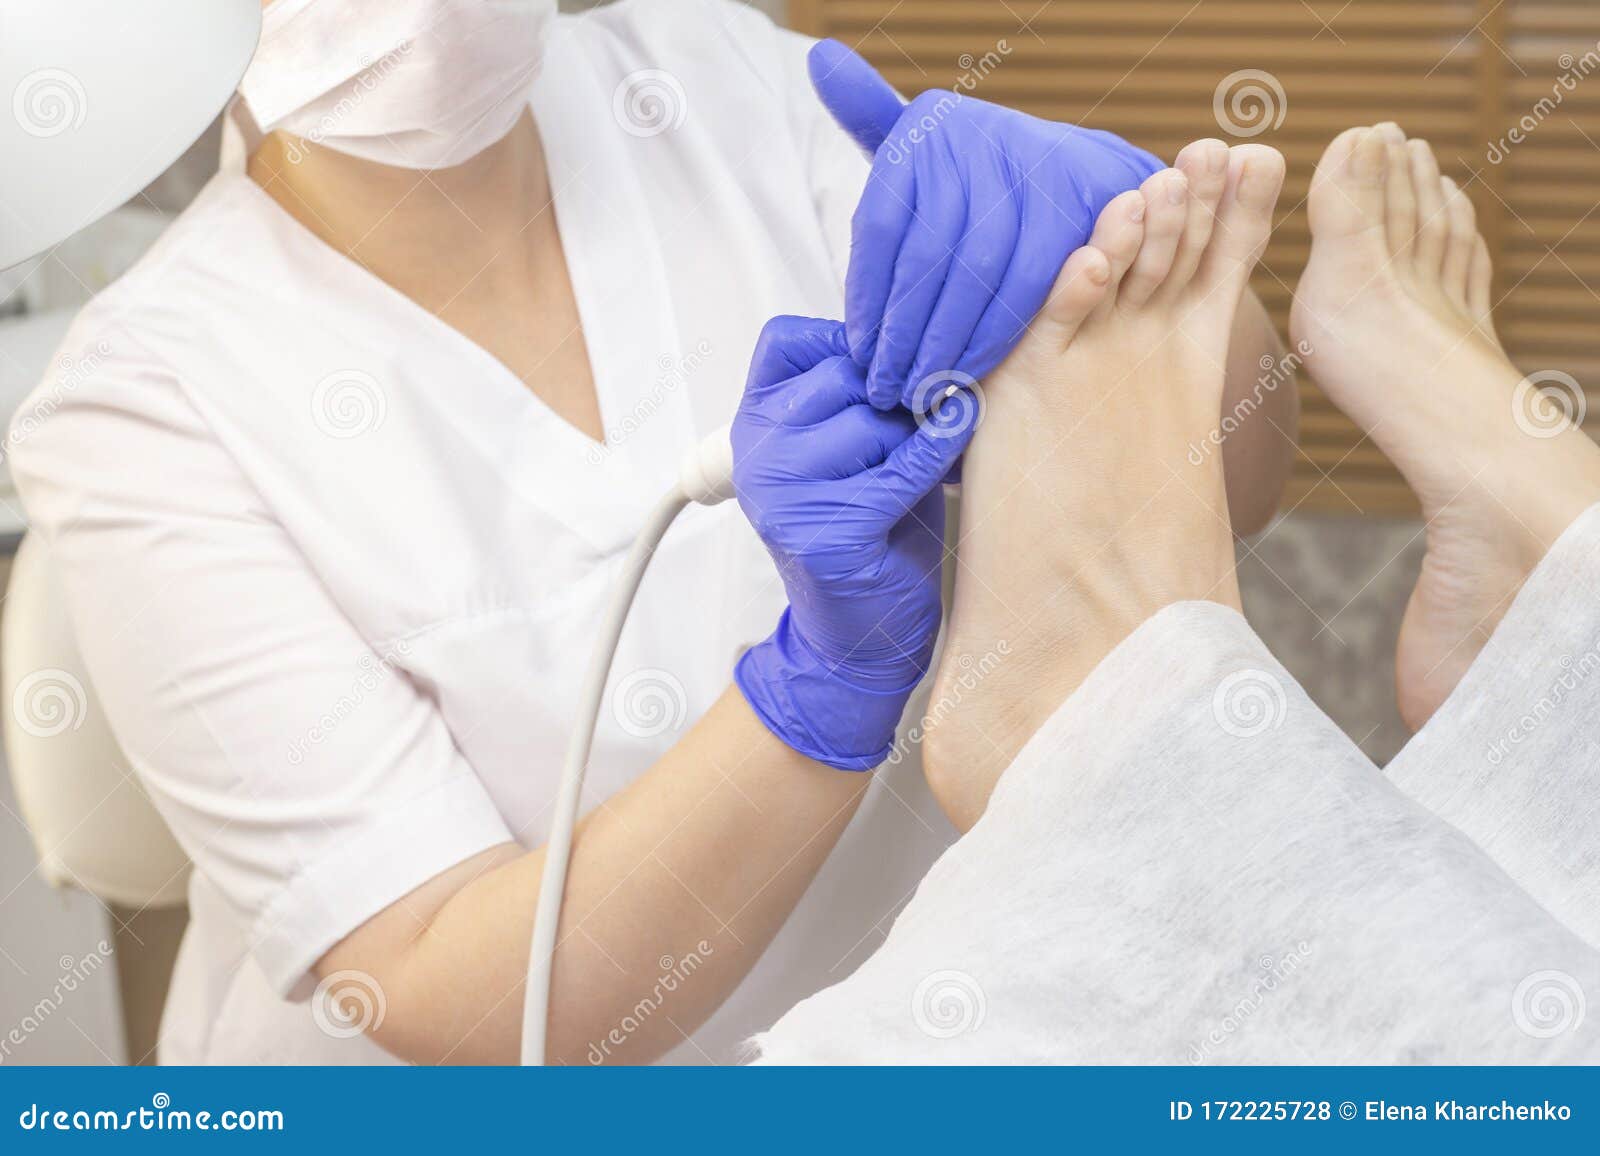 therapeutic pedicure. master podologist does hardware pedicure. visit to the podiatry. foot treatment in the spa.